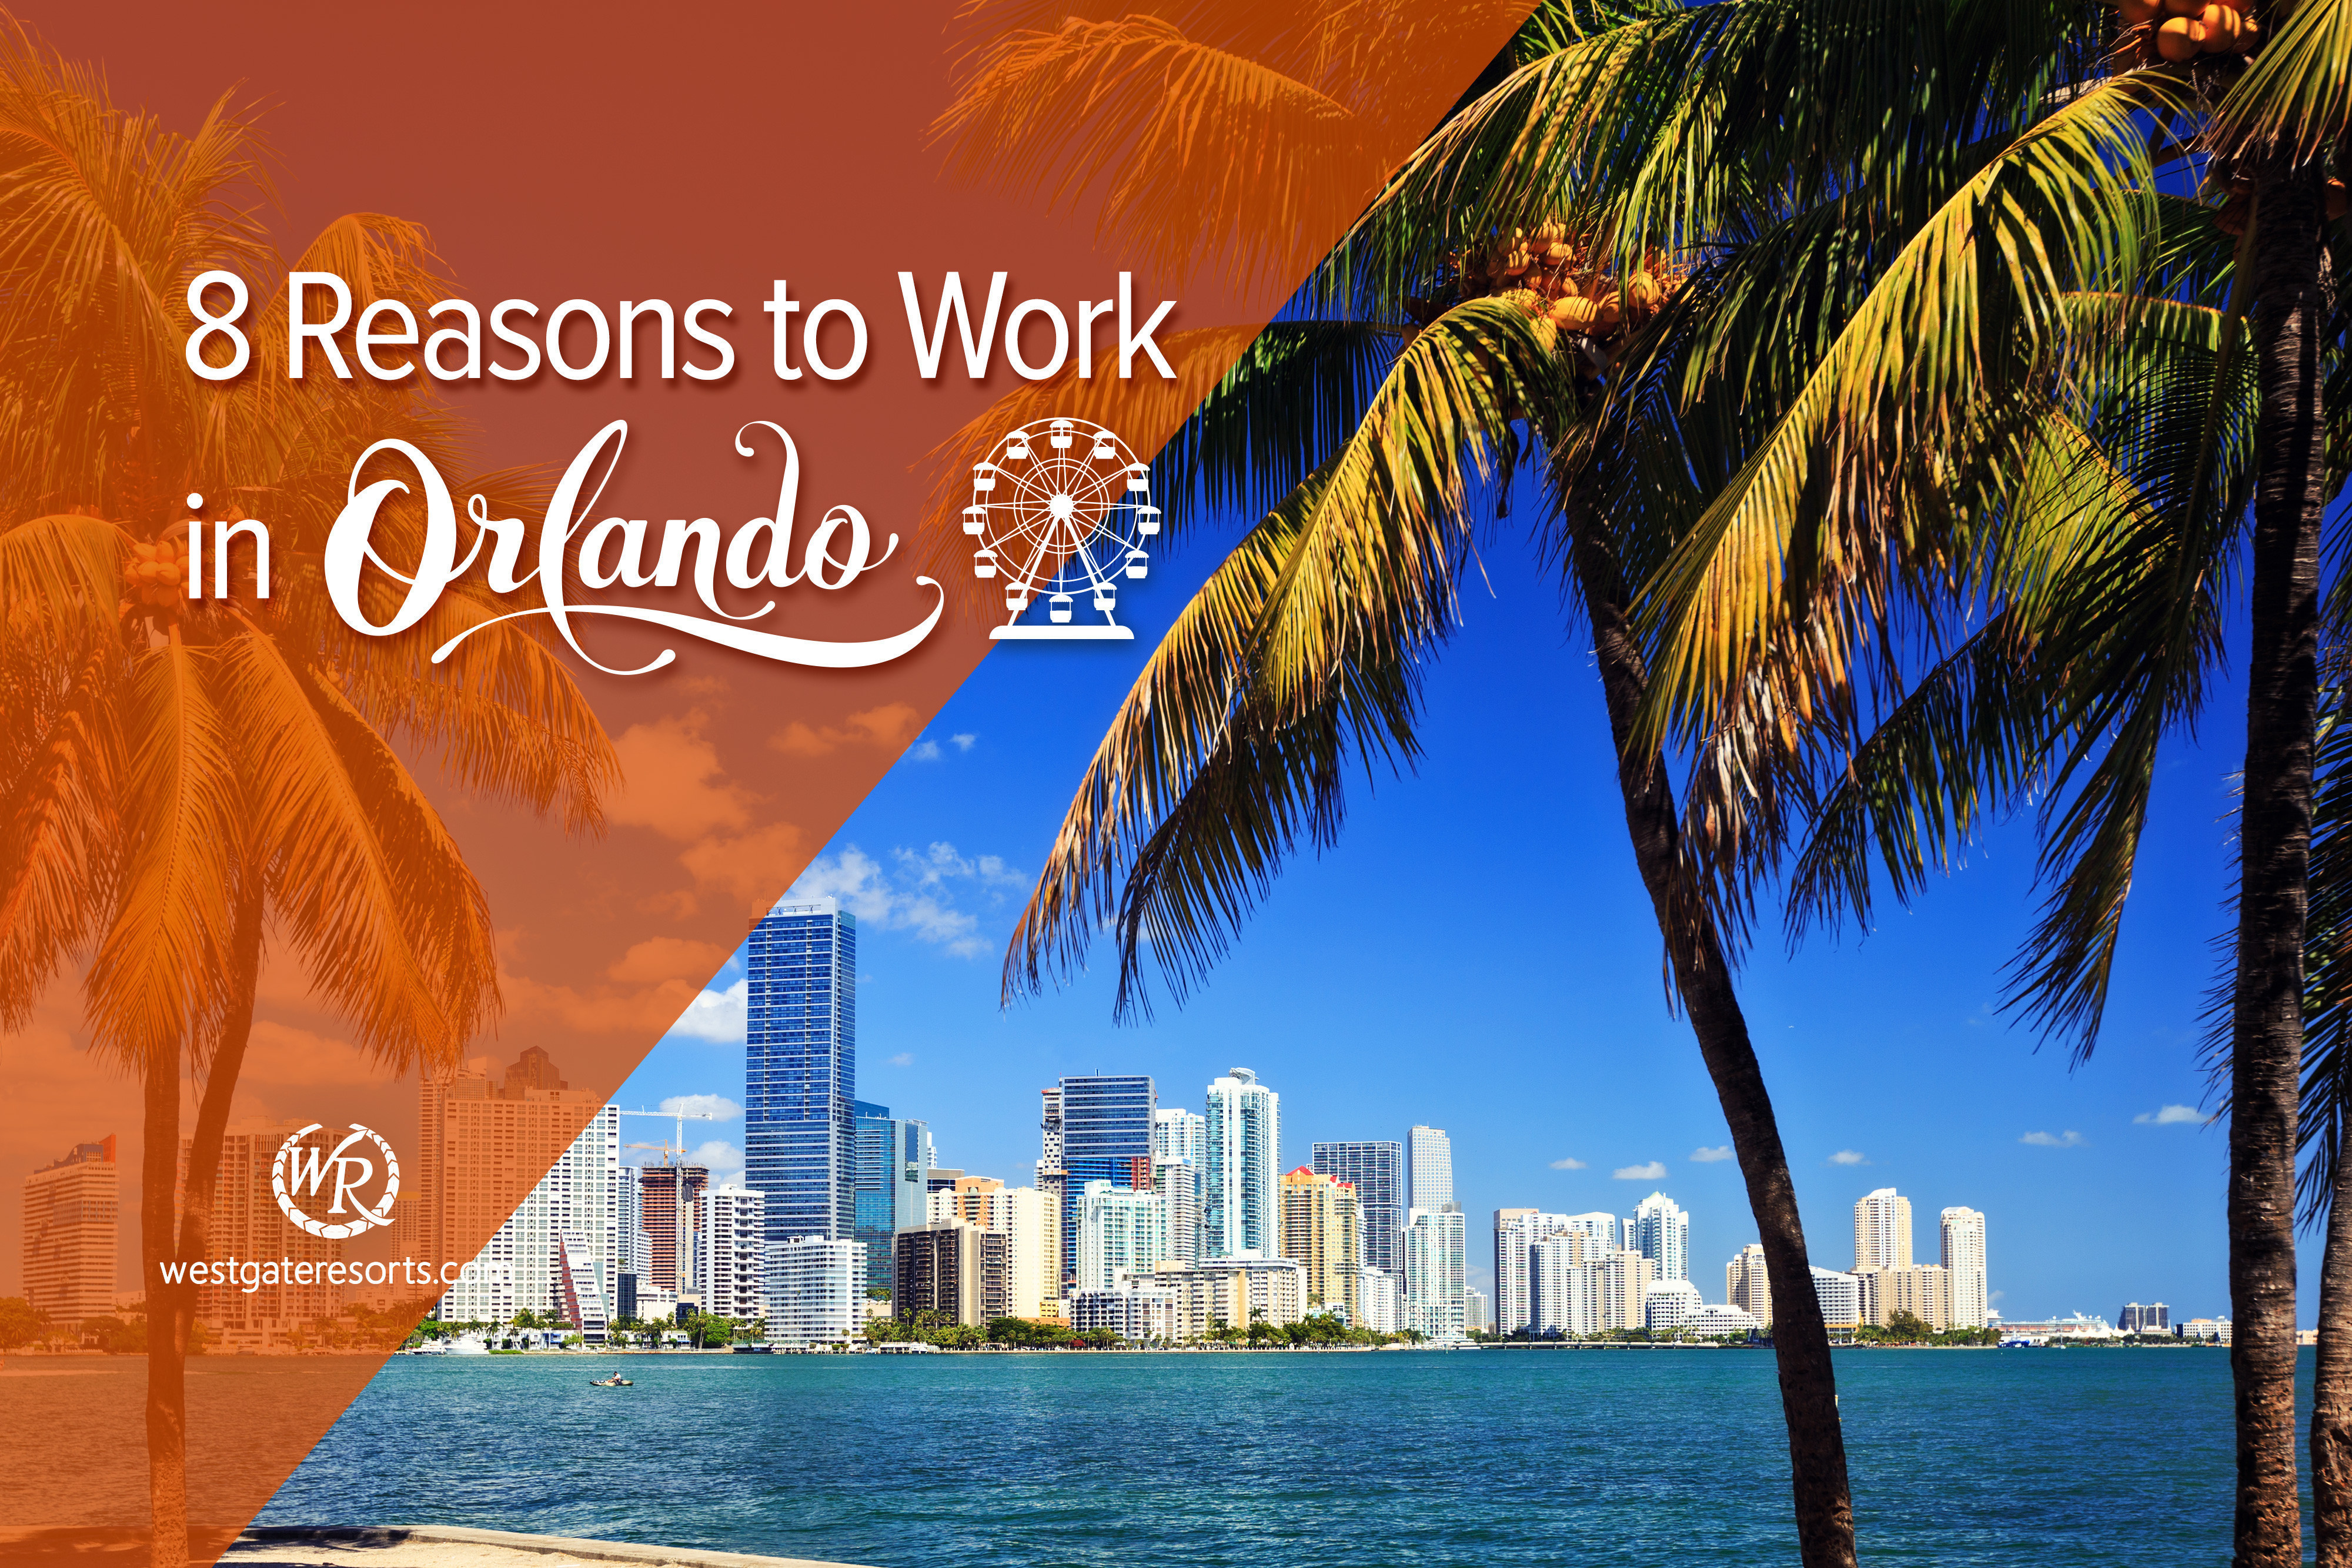 8 Reasons to Work in Orlando